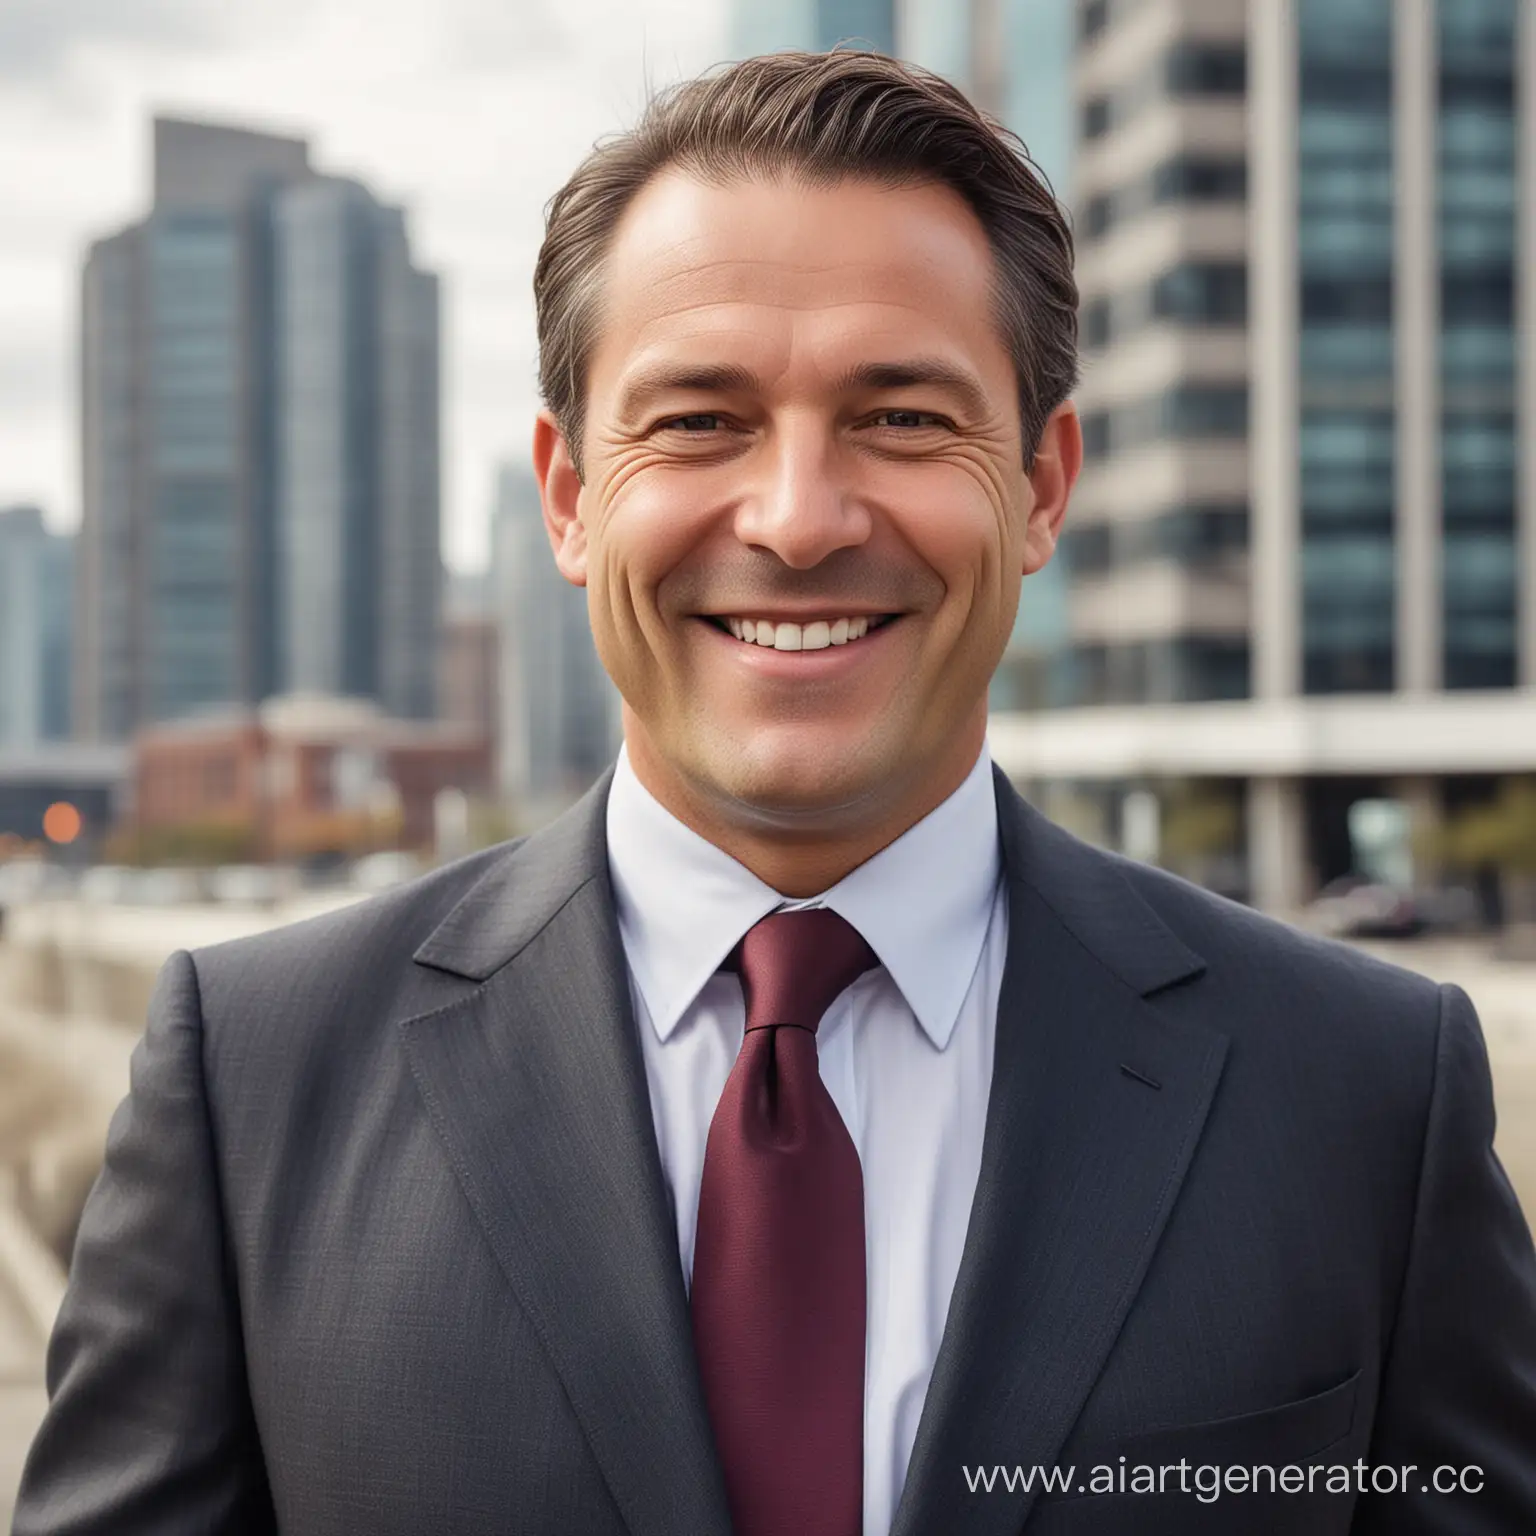 Urban-Professional-MiddleAged-Gentleman-Smiling-in-a-Suit-Amidst-City-Progress